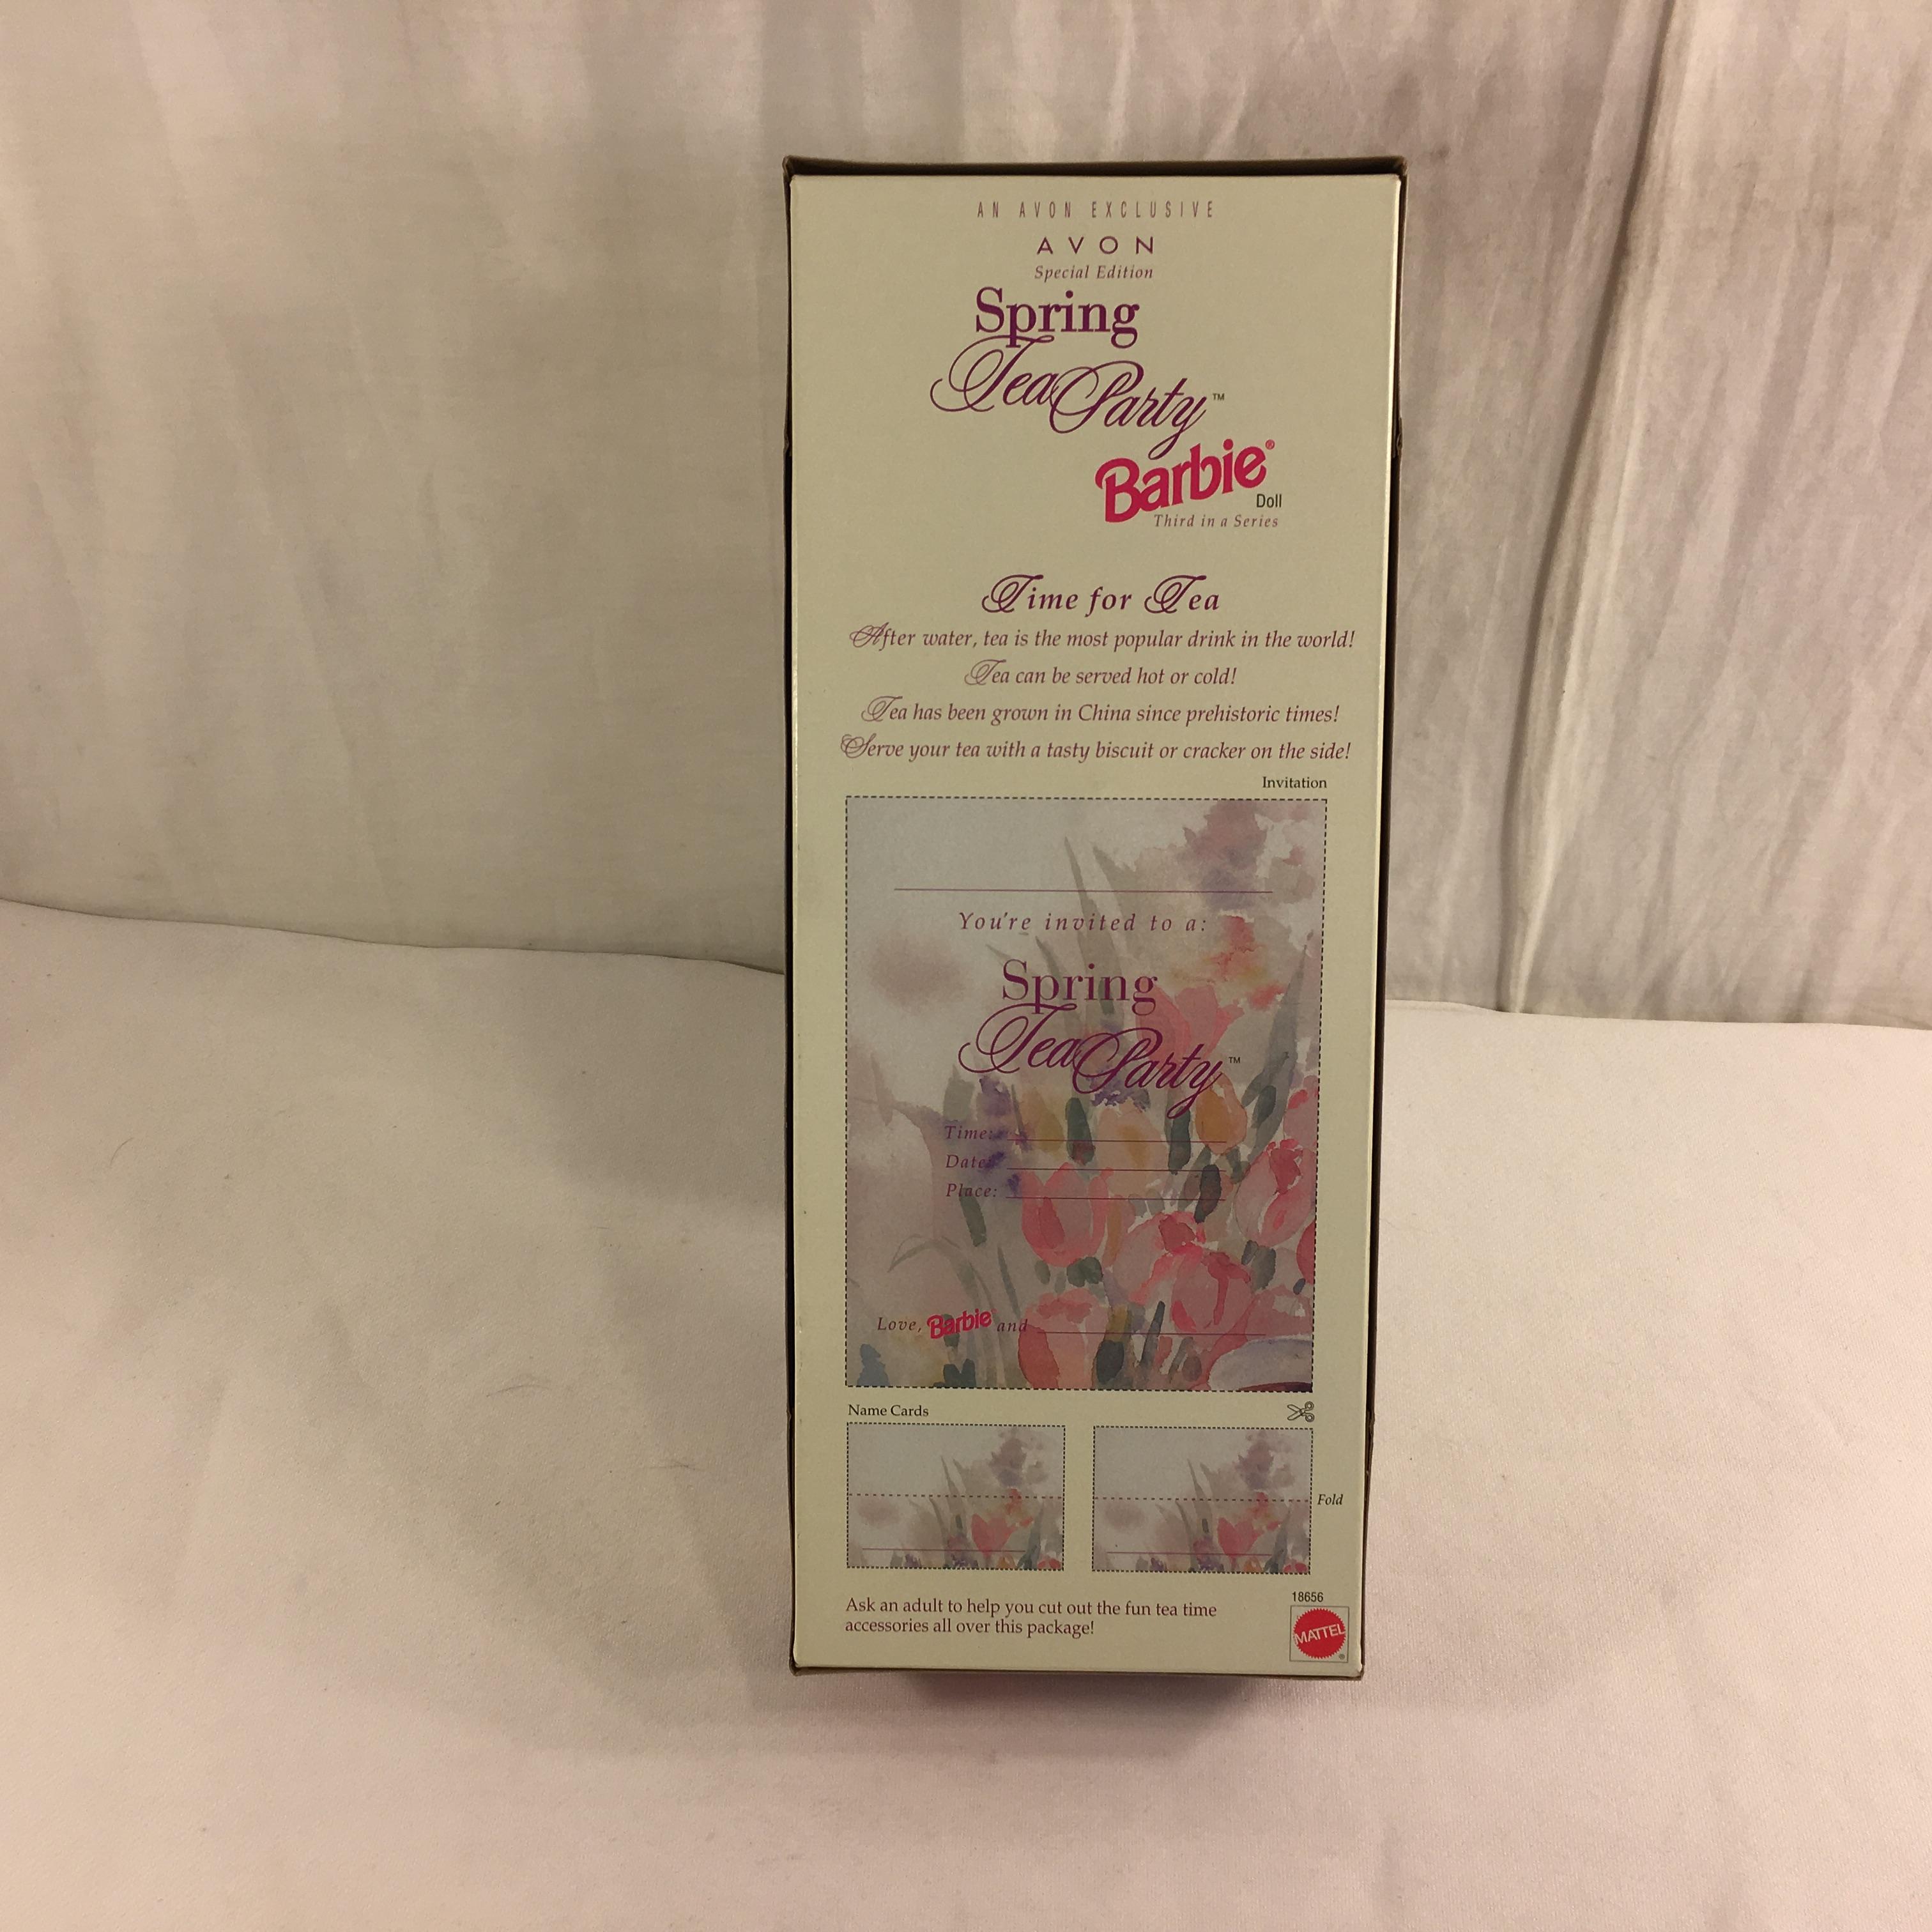 Collector Barbie Mattel Avon Special Edition Spring Petals Barbie 2nd in a Series 12.5"Tall Box